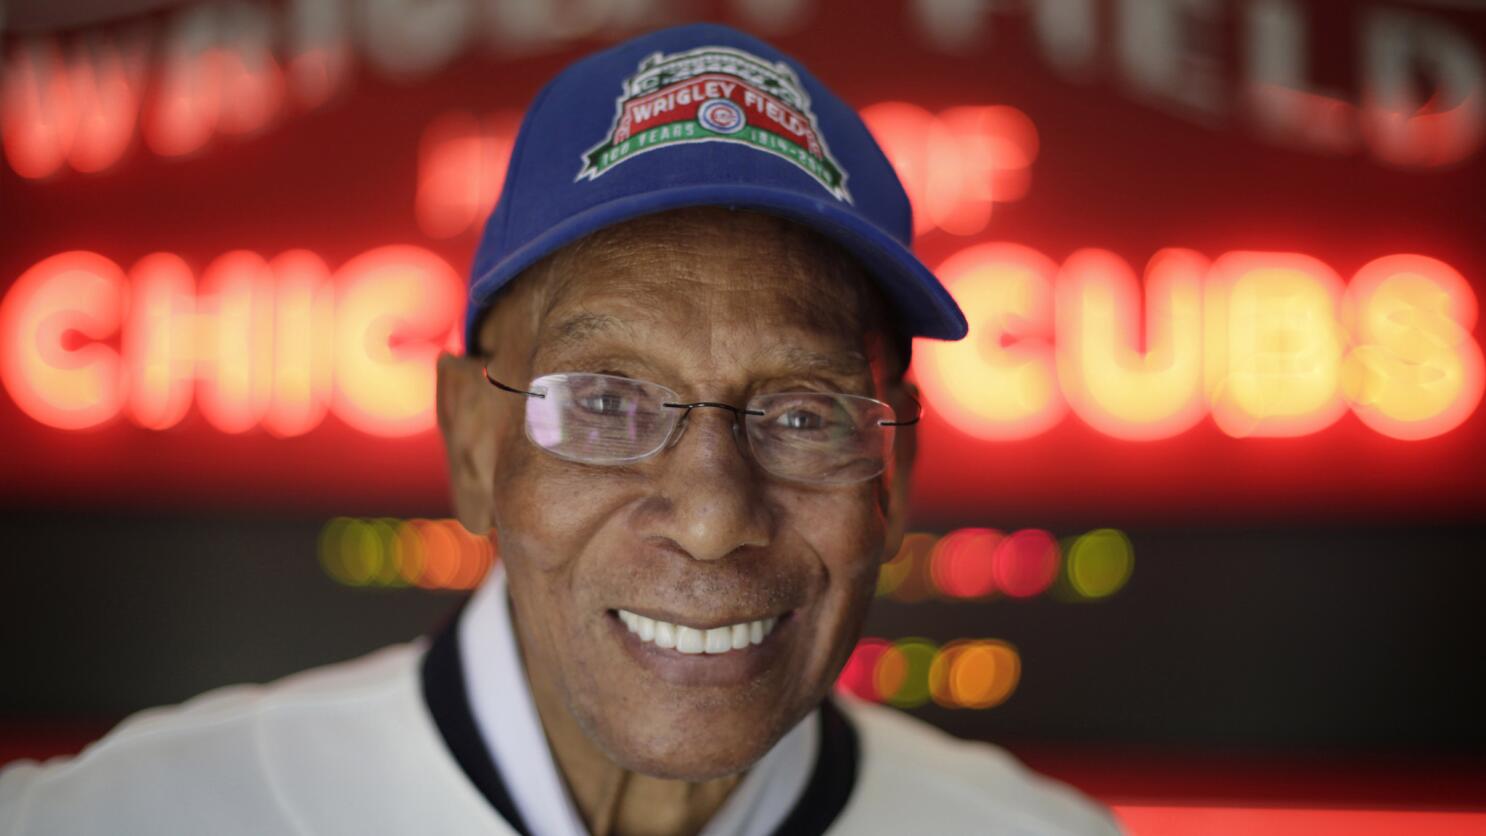 Ernie Banks epitomized American optimism - Los Angeles Times